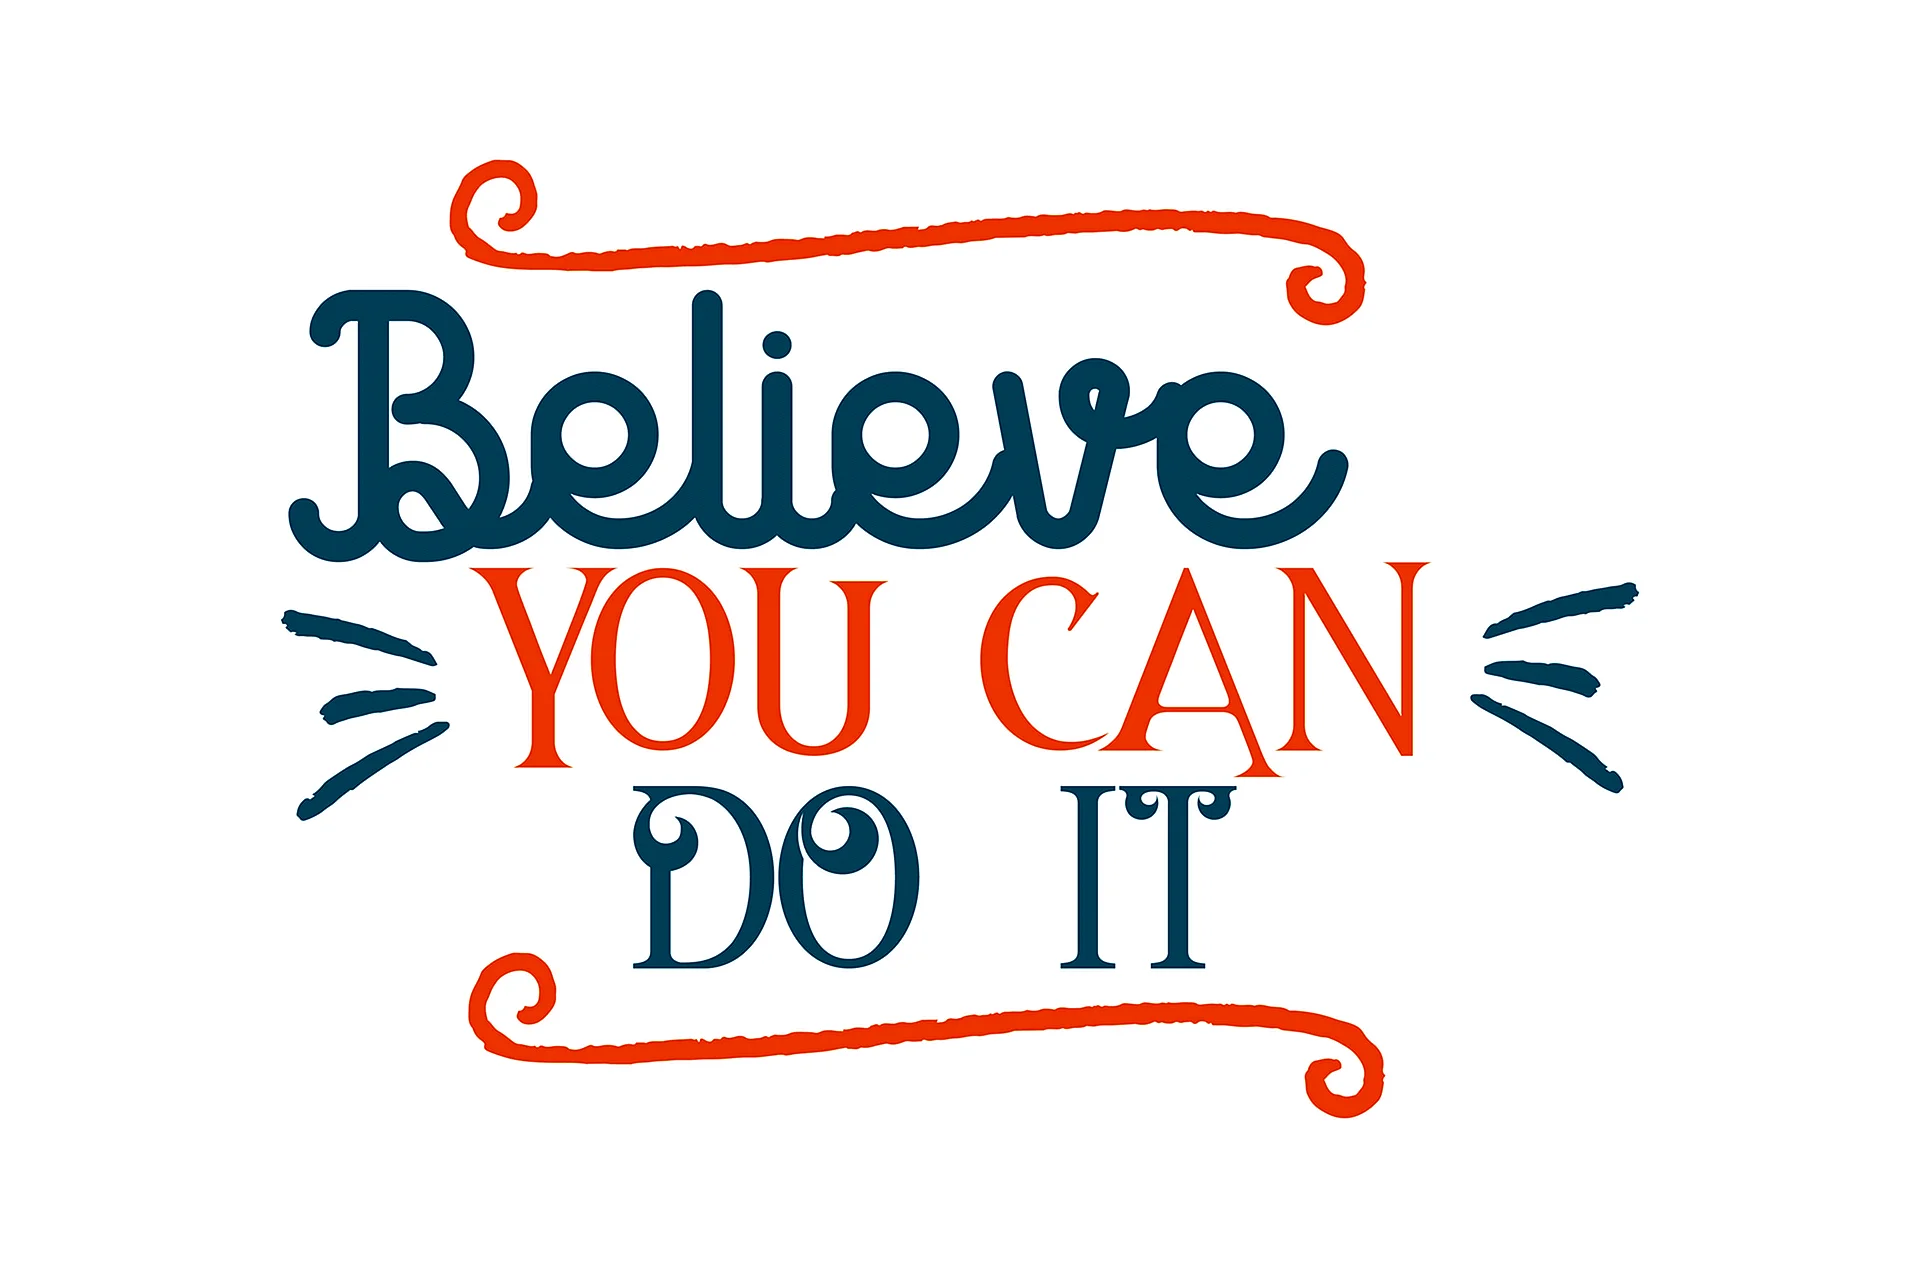 You Can Do It Wallpaper